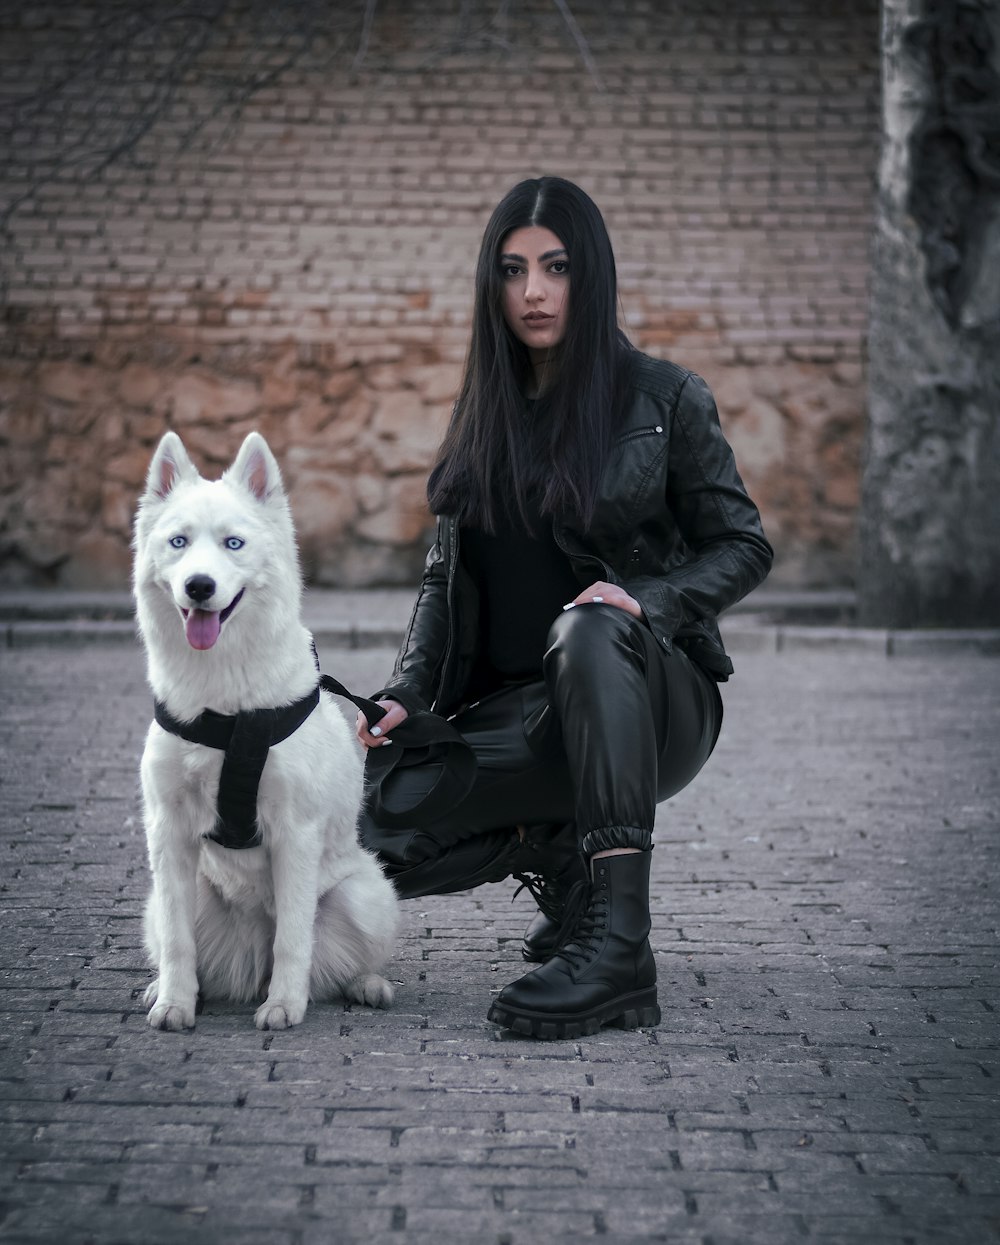 a woman sitting on the ground next to a white dog